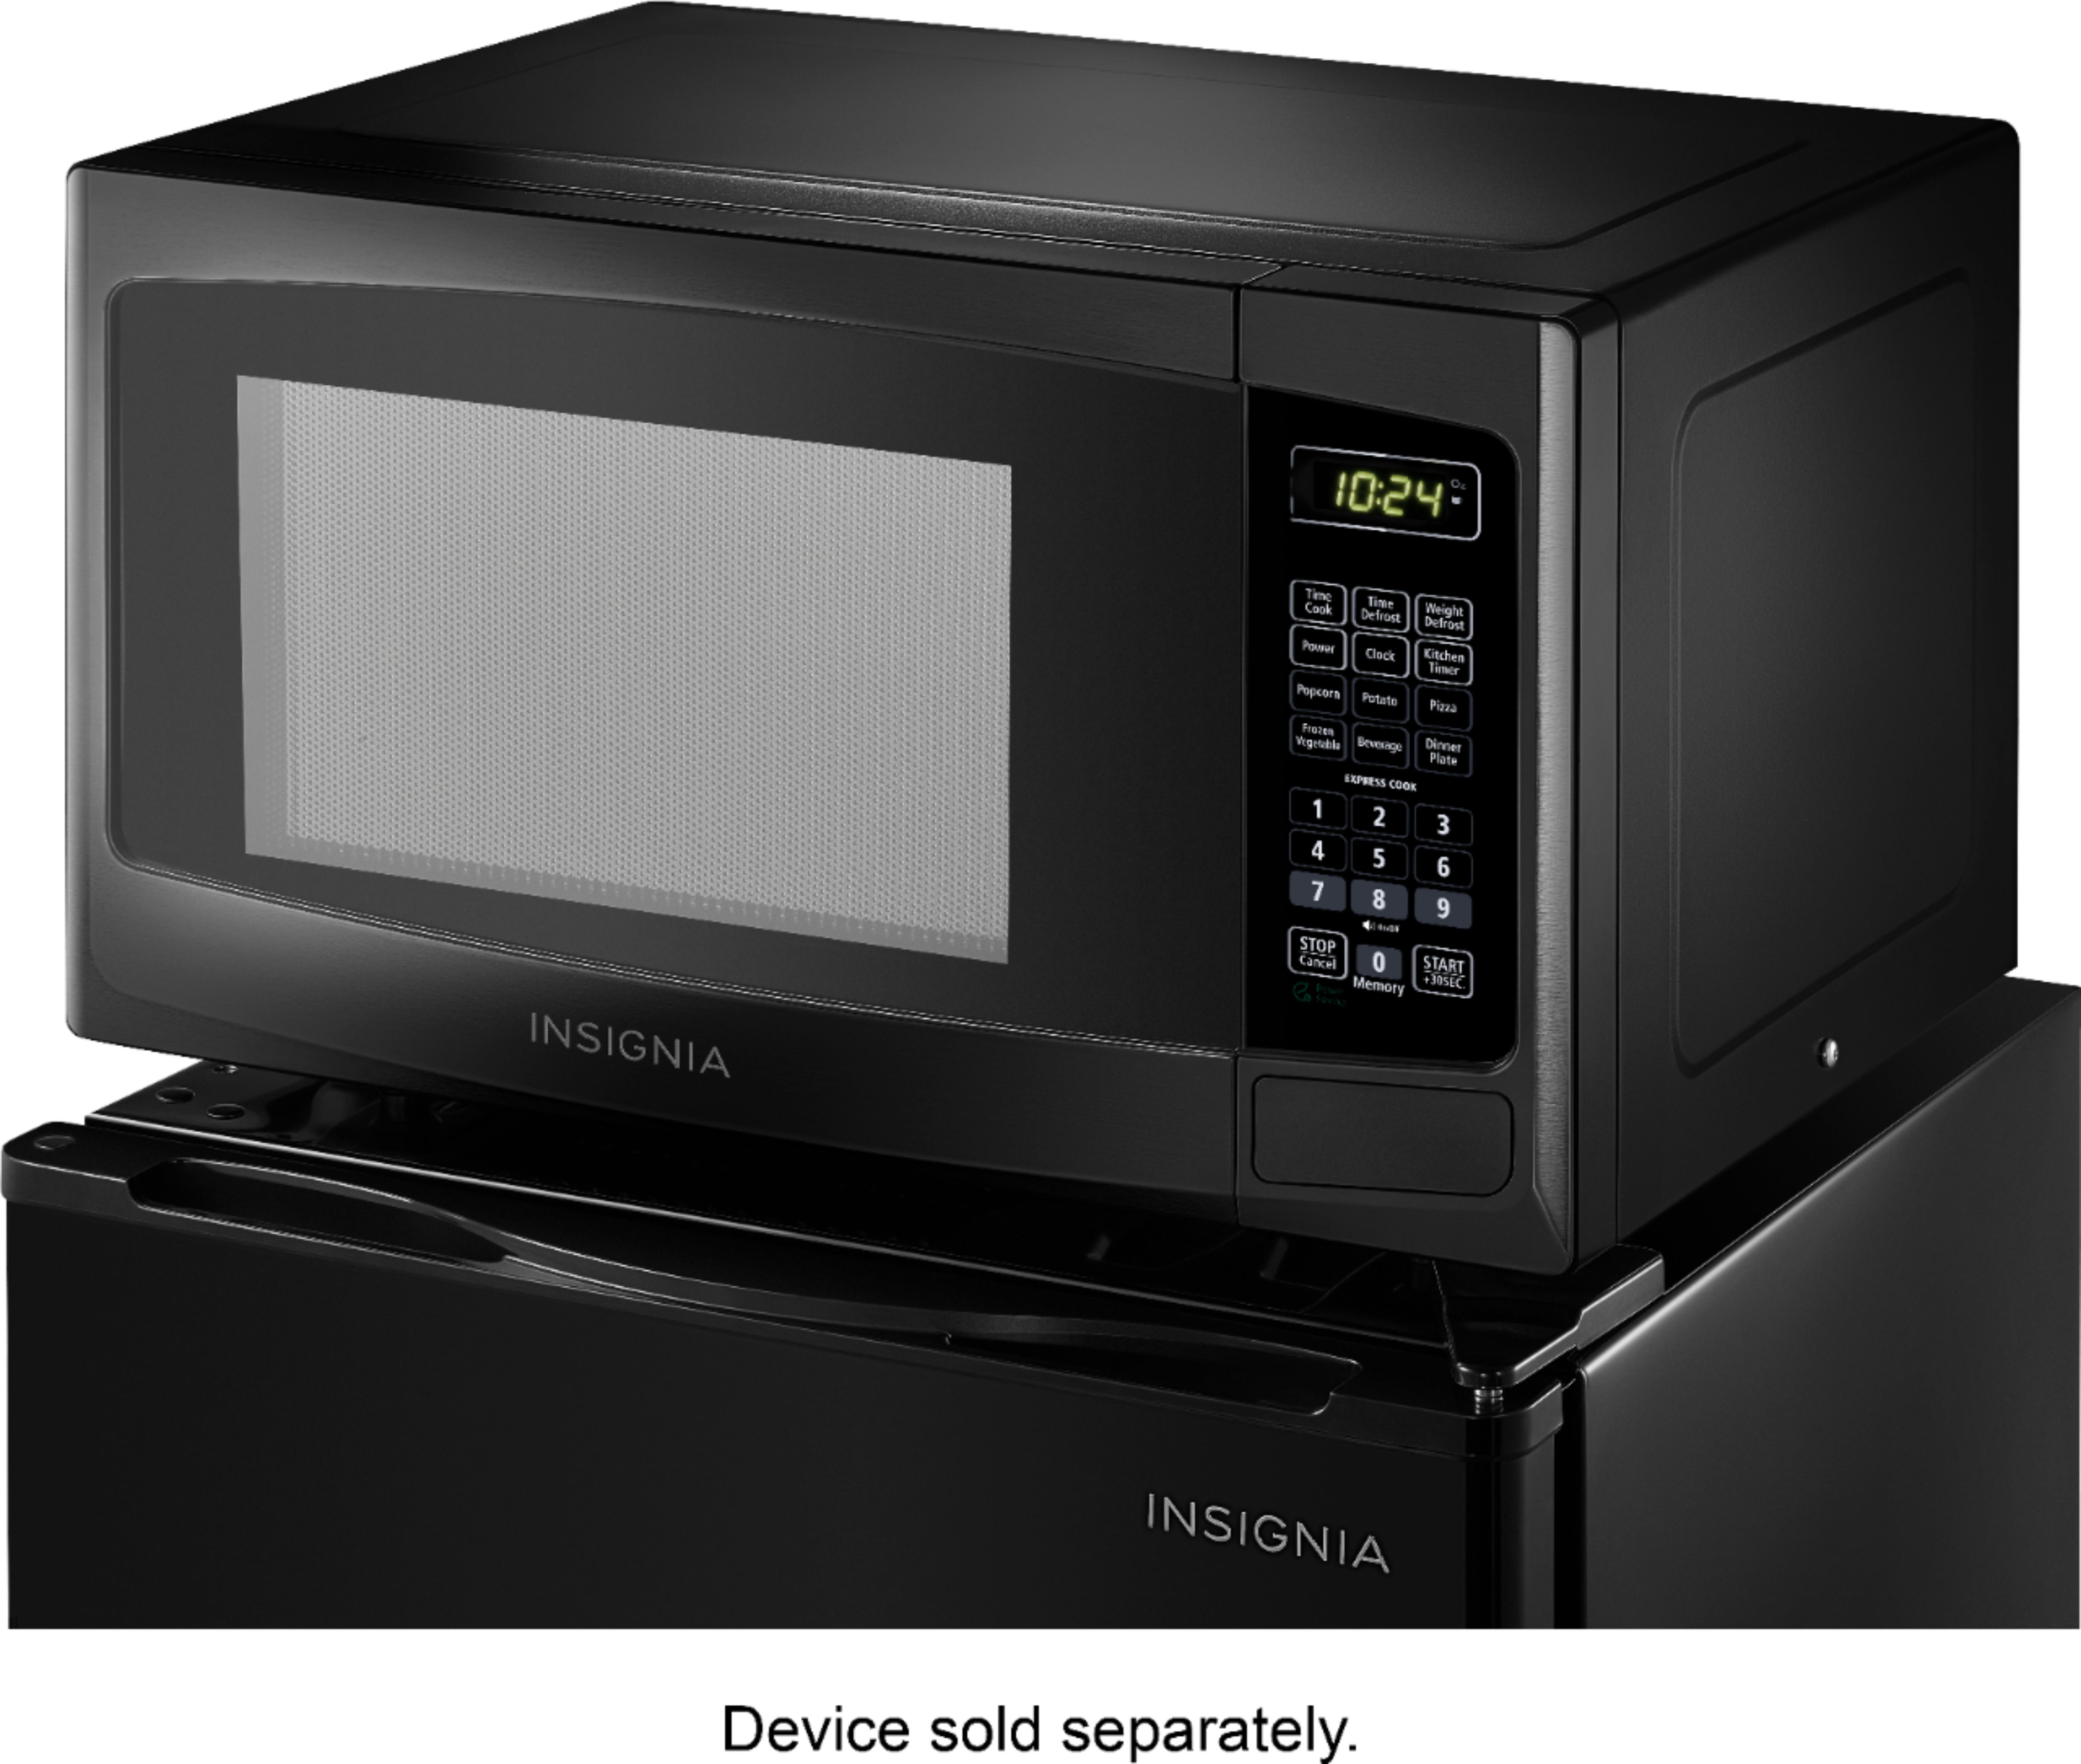 Microwave - Insignia .9Cu.Ft. Stainless Steel - appliances - by owner -  sale - craigslist